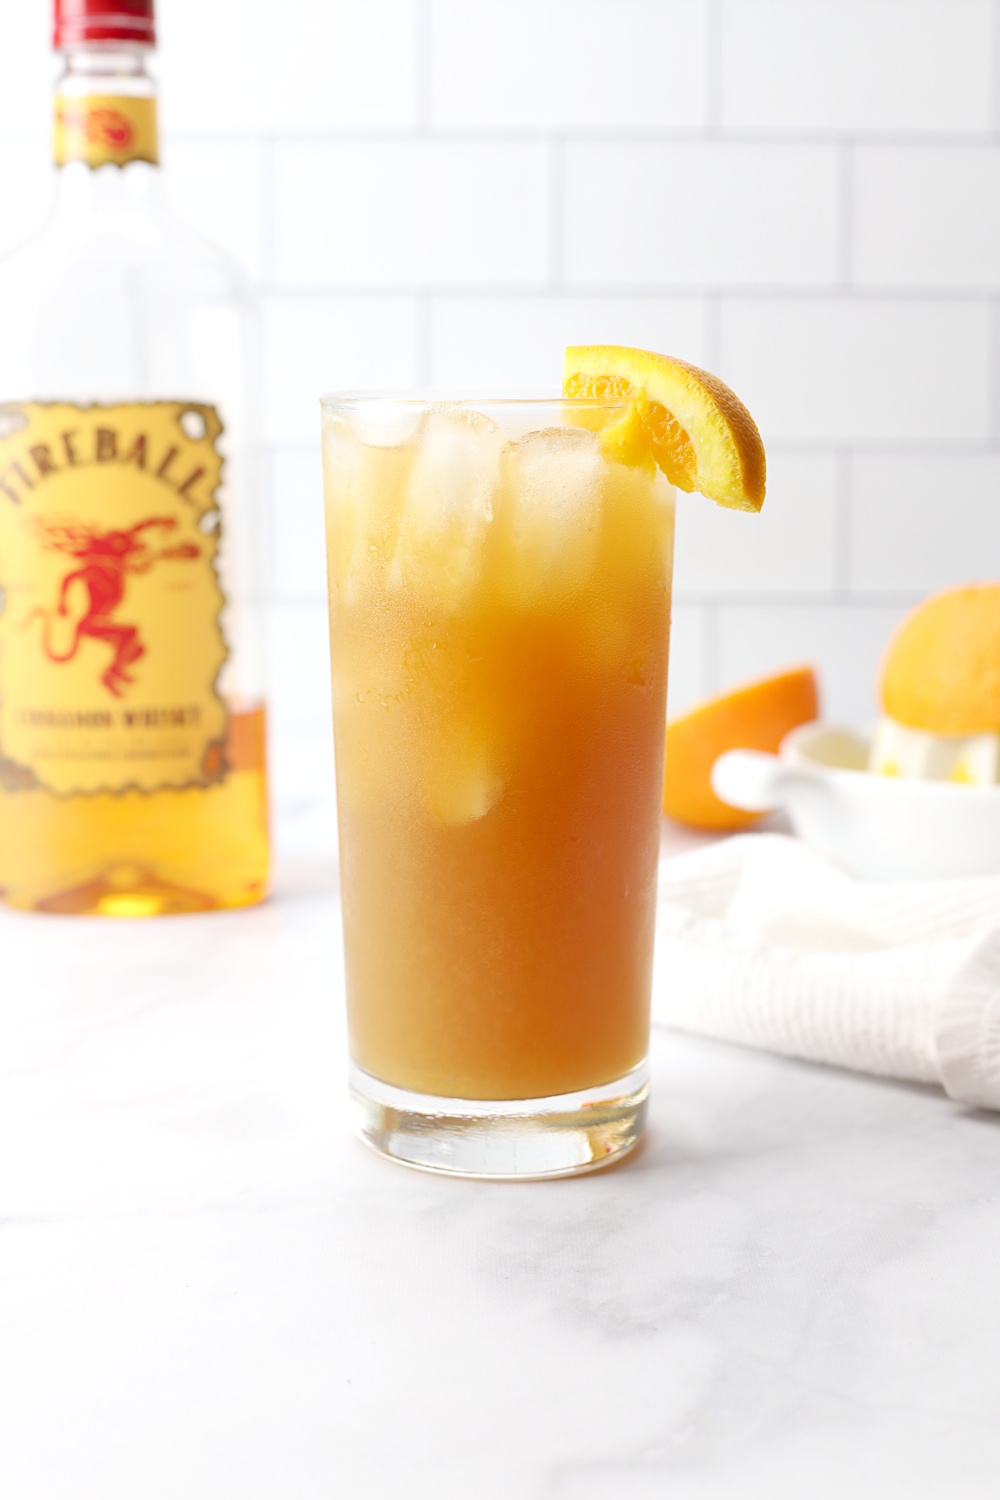 A glass of fireball orange sweet tea on a marble counter top.